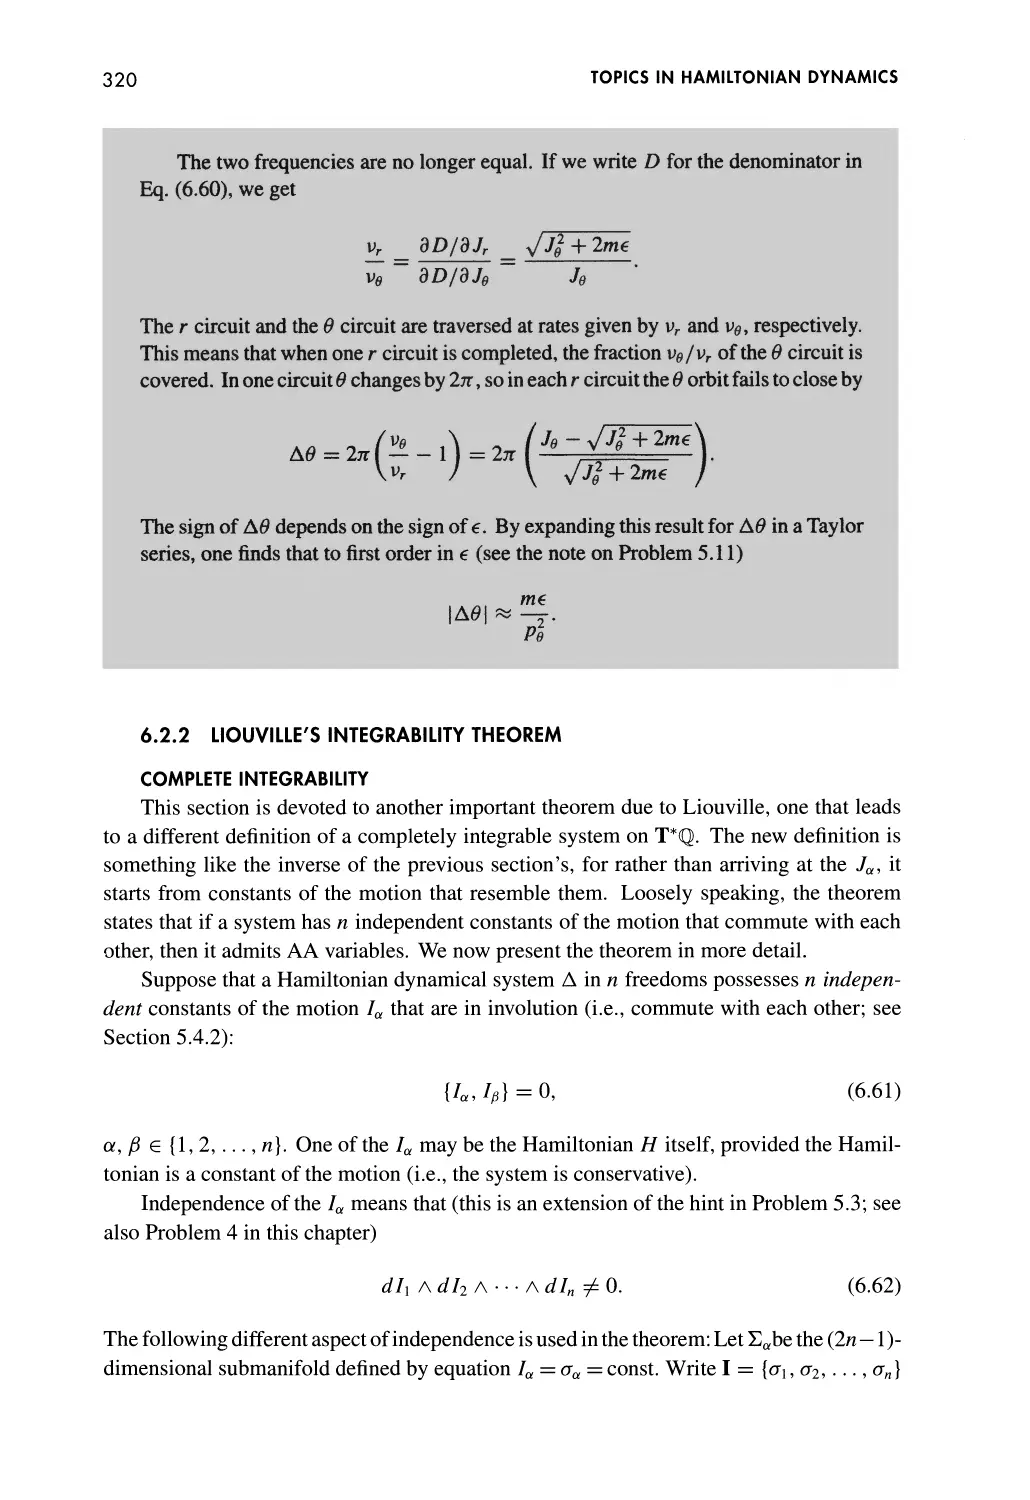 6.2.2 Liouville's Integrability Theorem